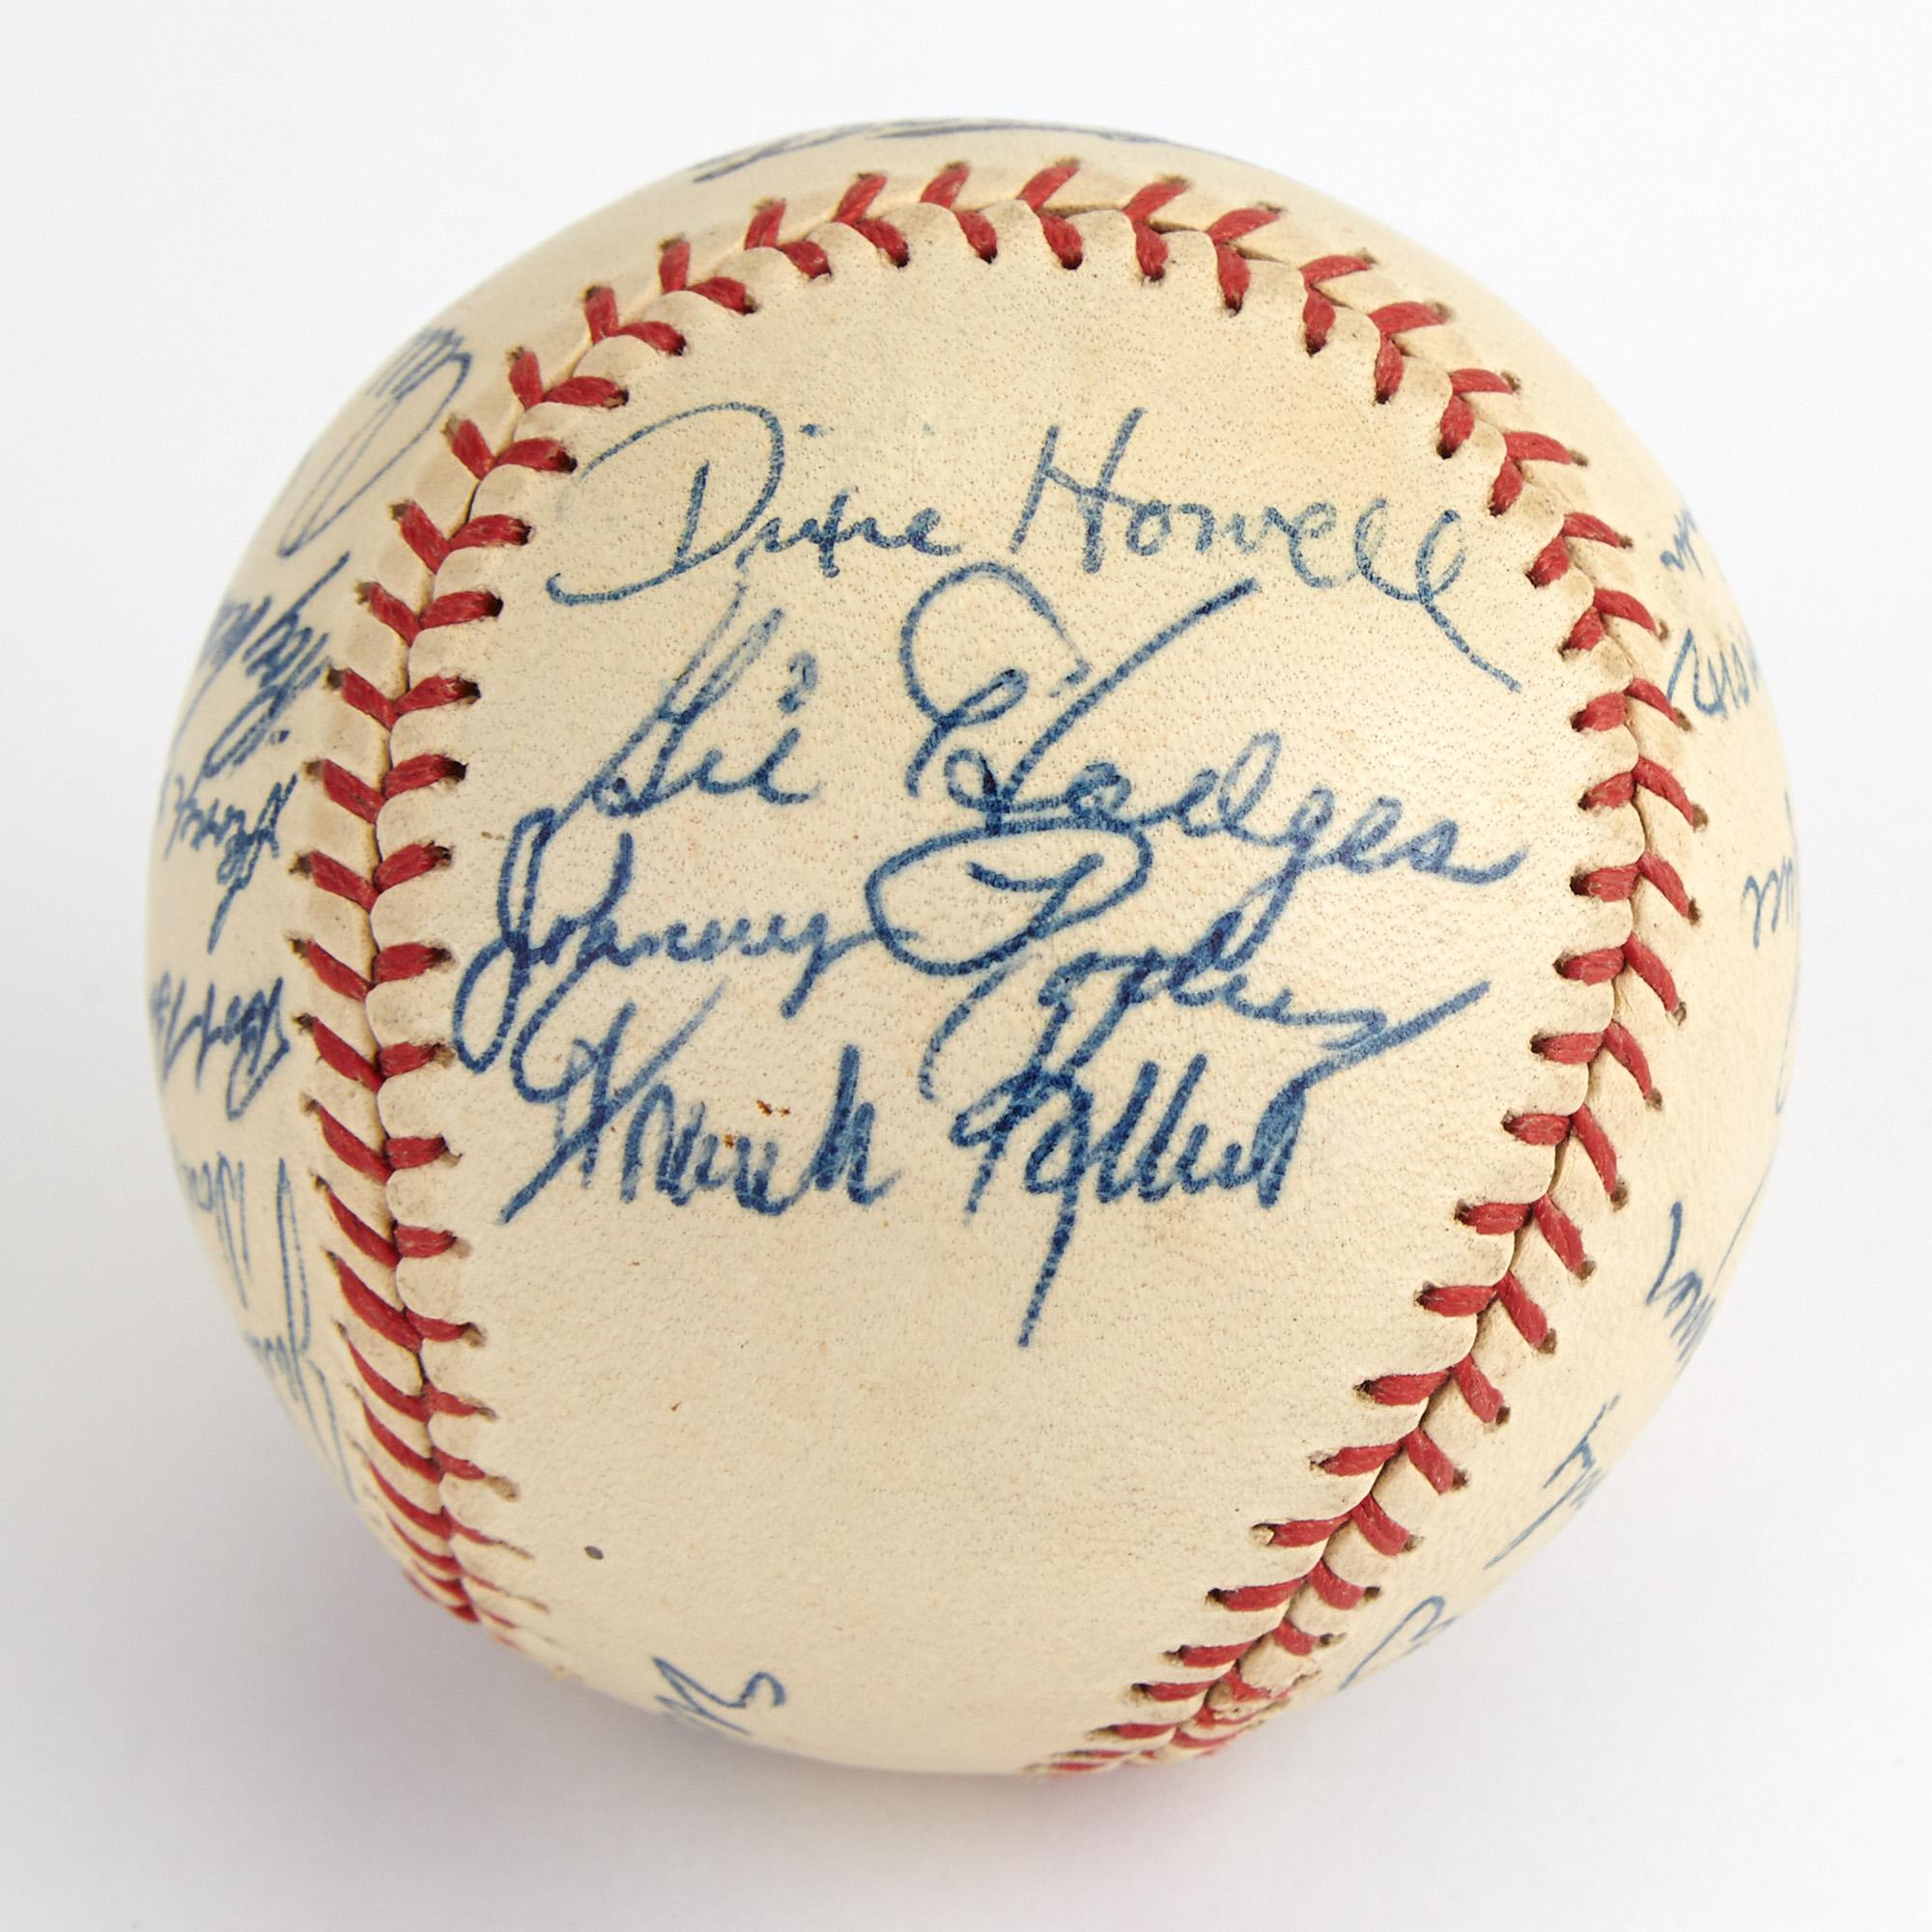 Lot Detail - 1955 Don Newcombe Brooklyn Dodgers Autographed